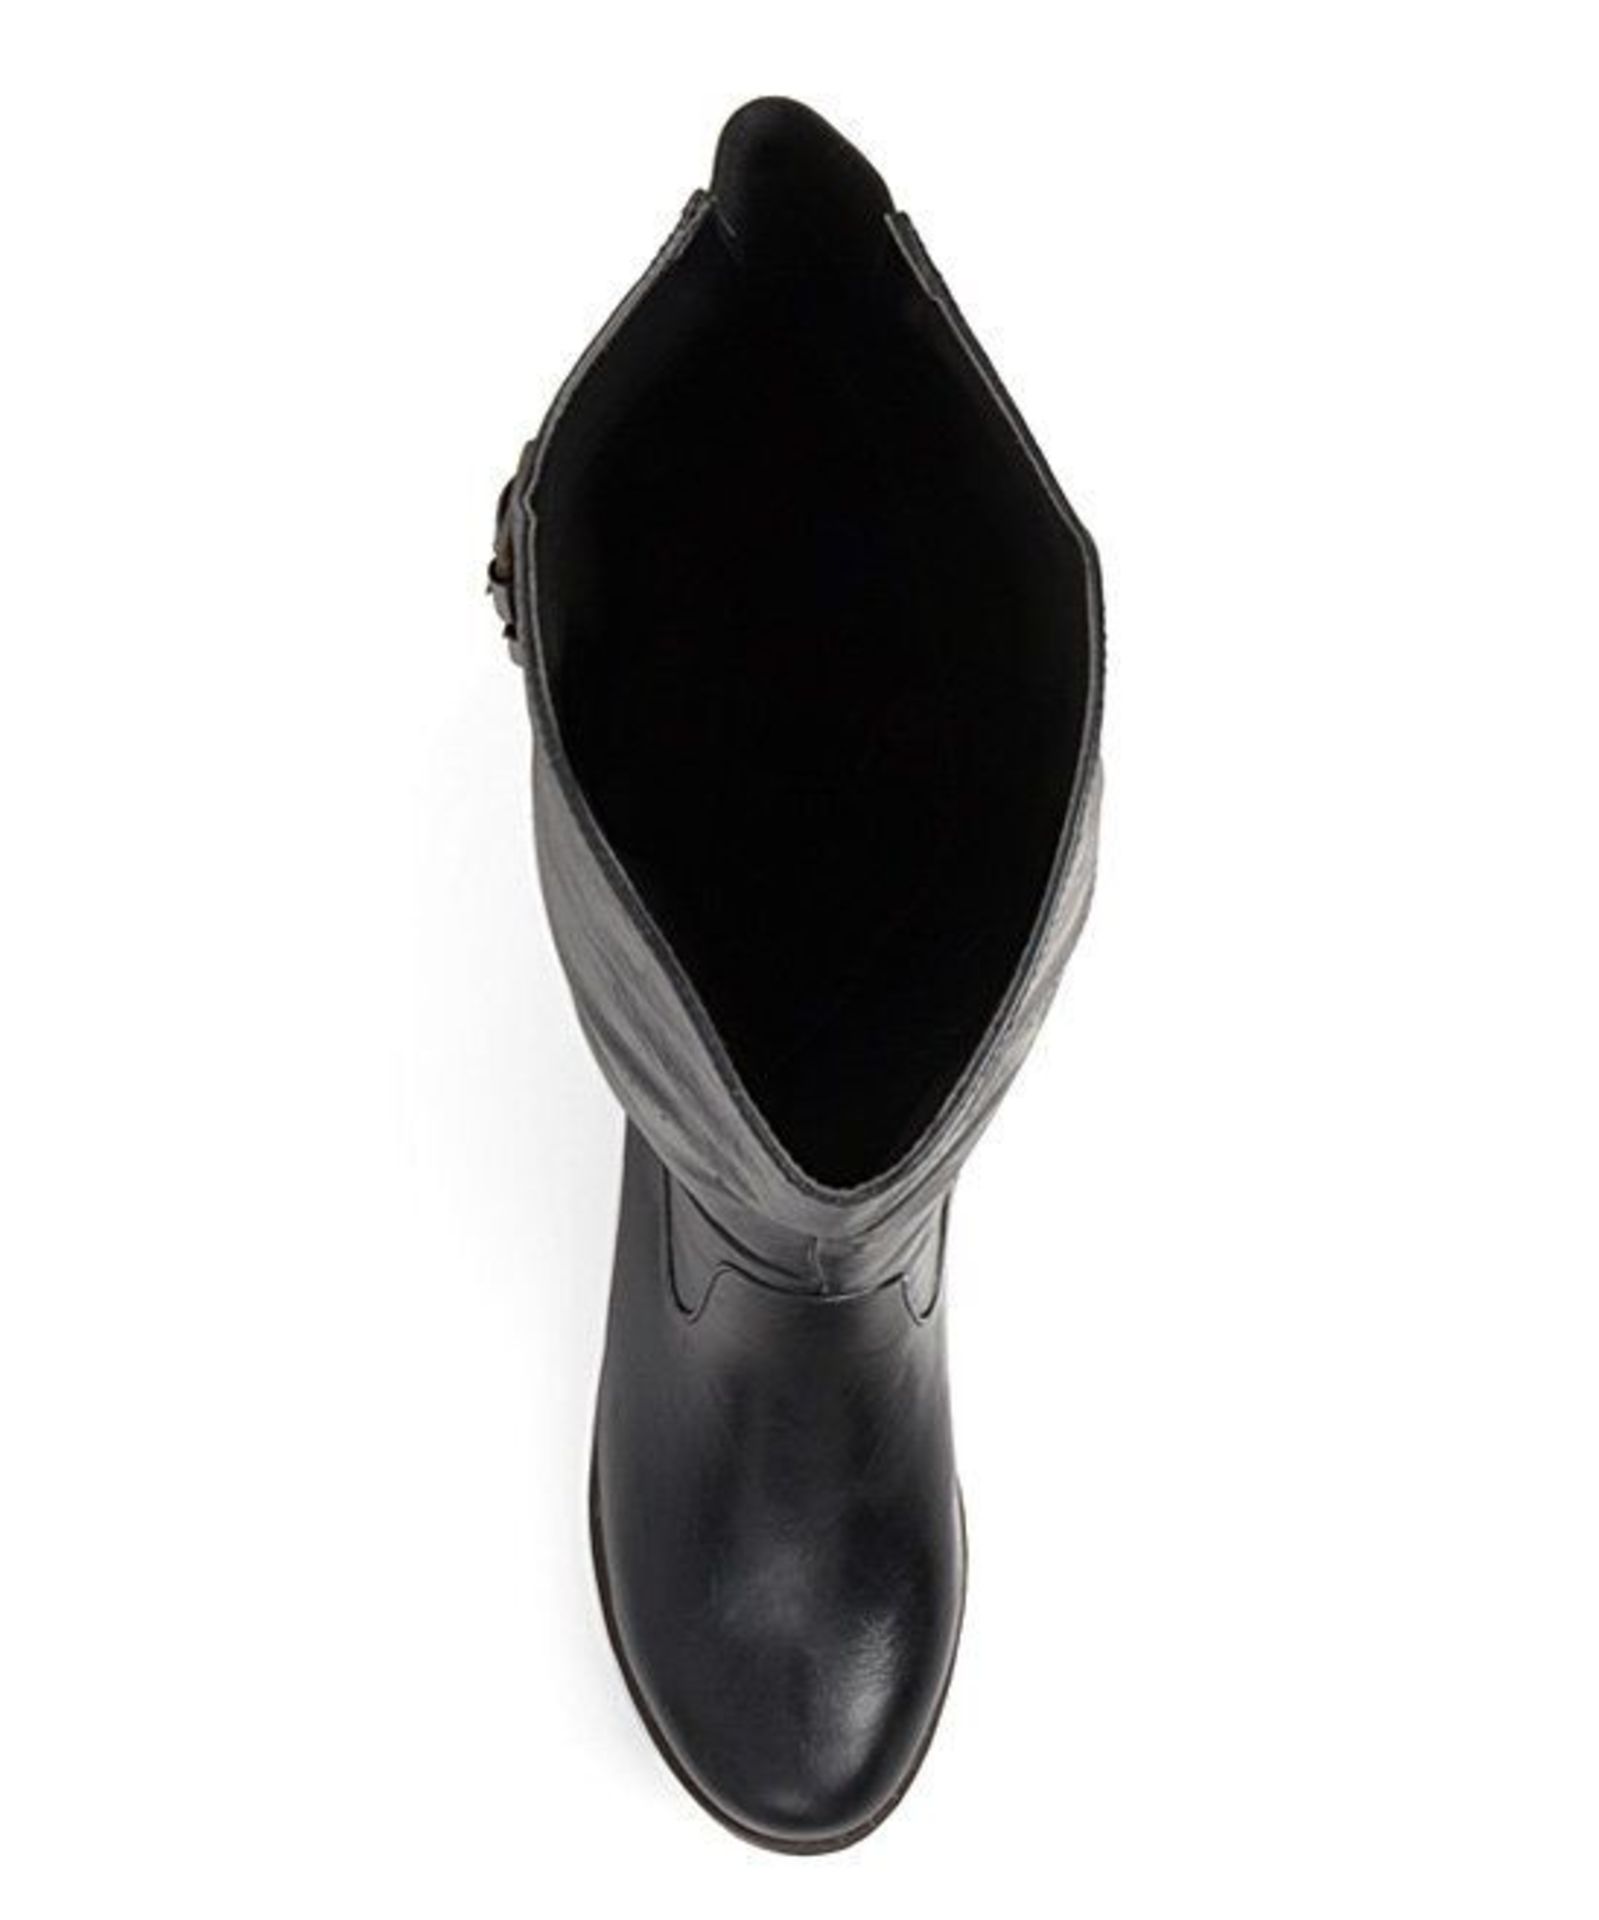 Journee Collection Black Tori Riding Boot (Uk Size 7:Us Size 9) (New with box) [Ref: 14251407-I- - Image 4 of 4